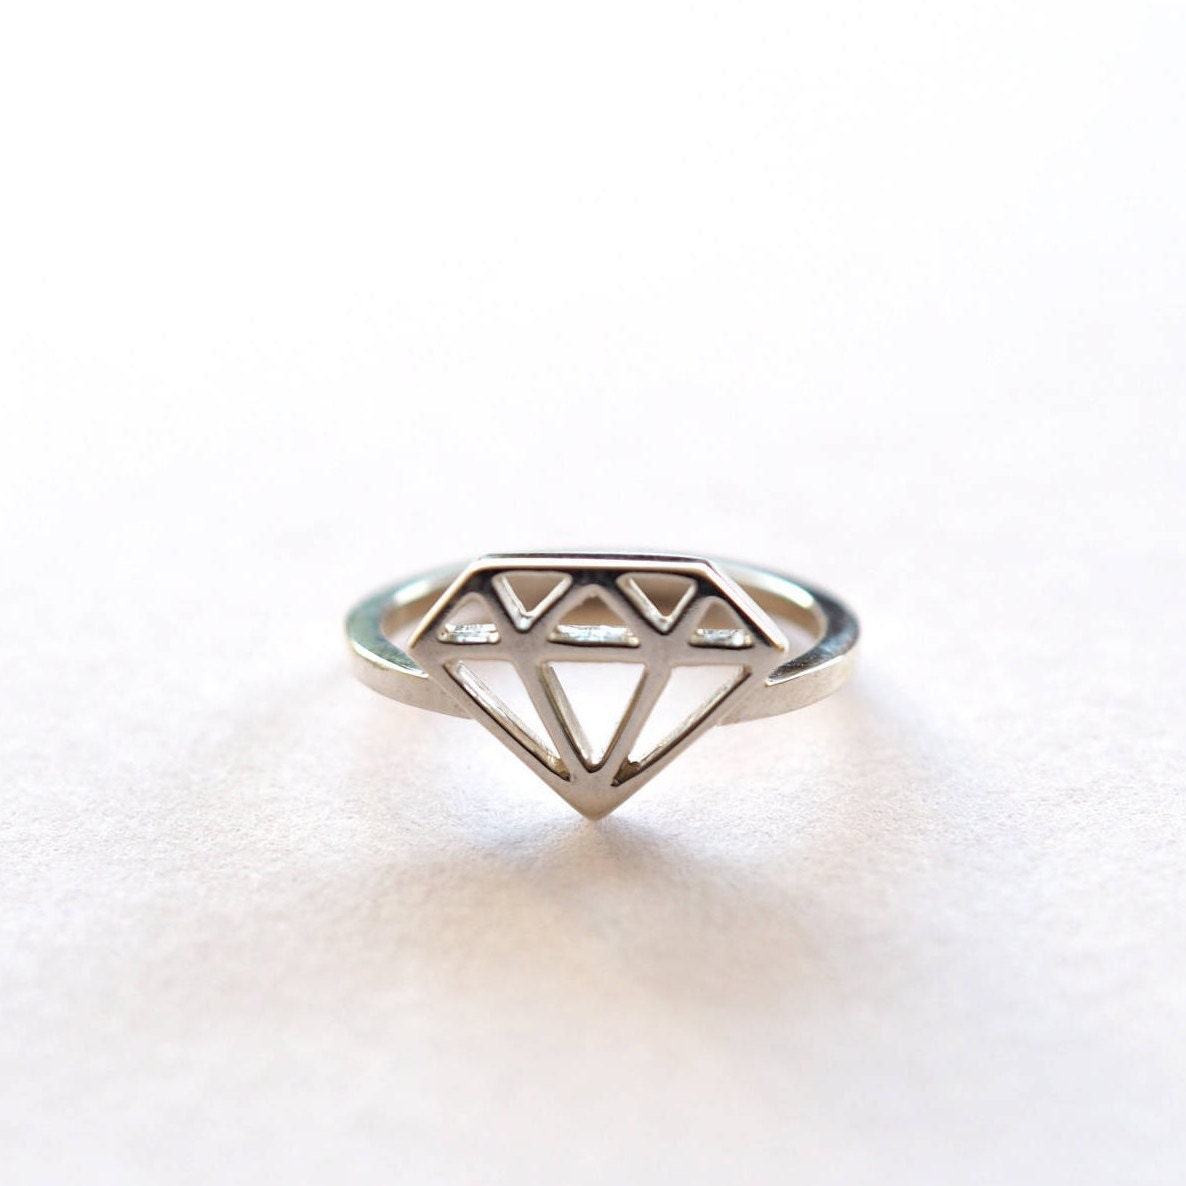 Diamond Symbol Ring - Recycled Sterling Silver